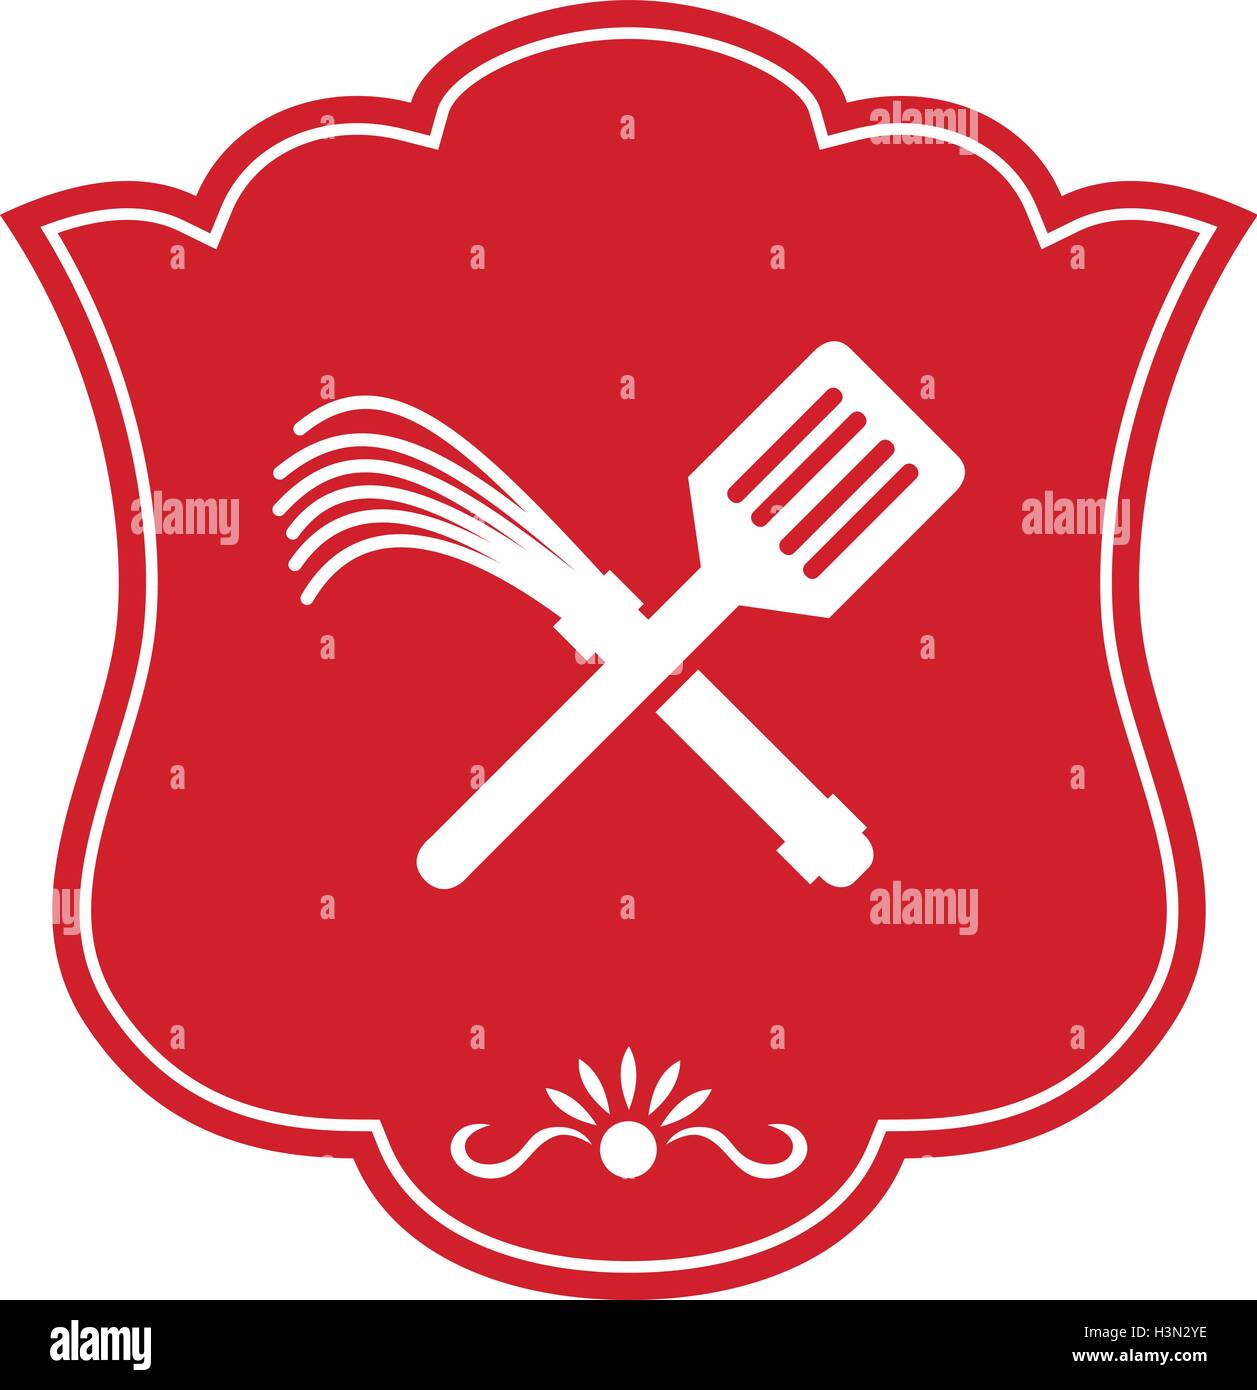 Illustration of a spatula crossed with a flogger whip set inside shield crest done in retro style. Stock Vector